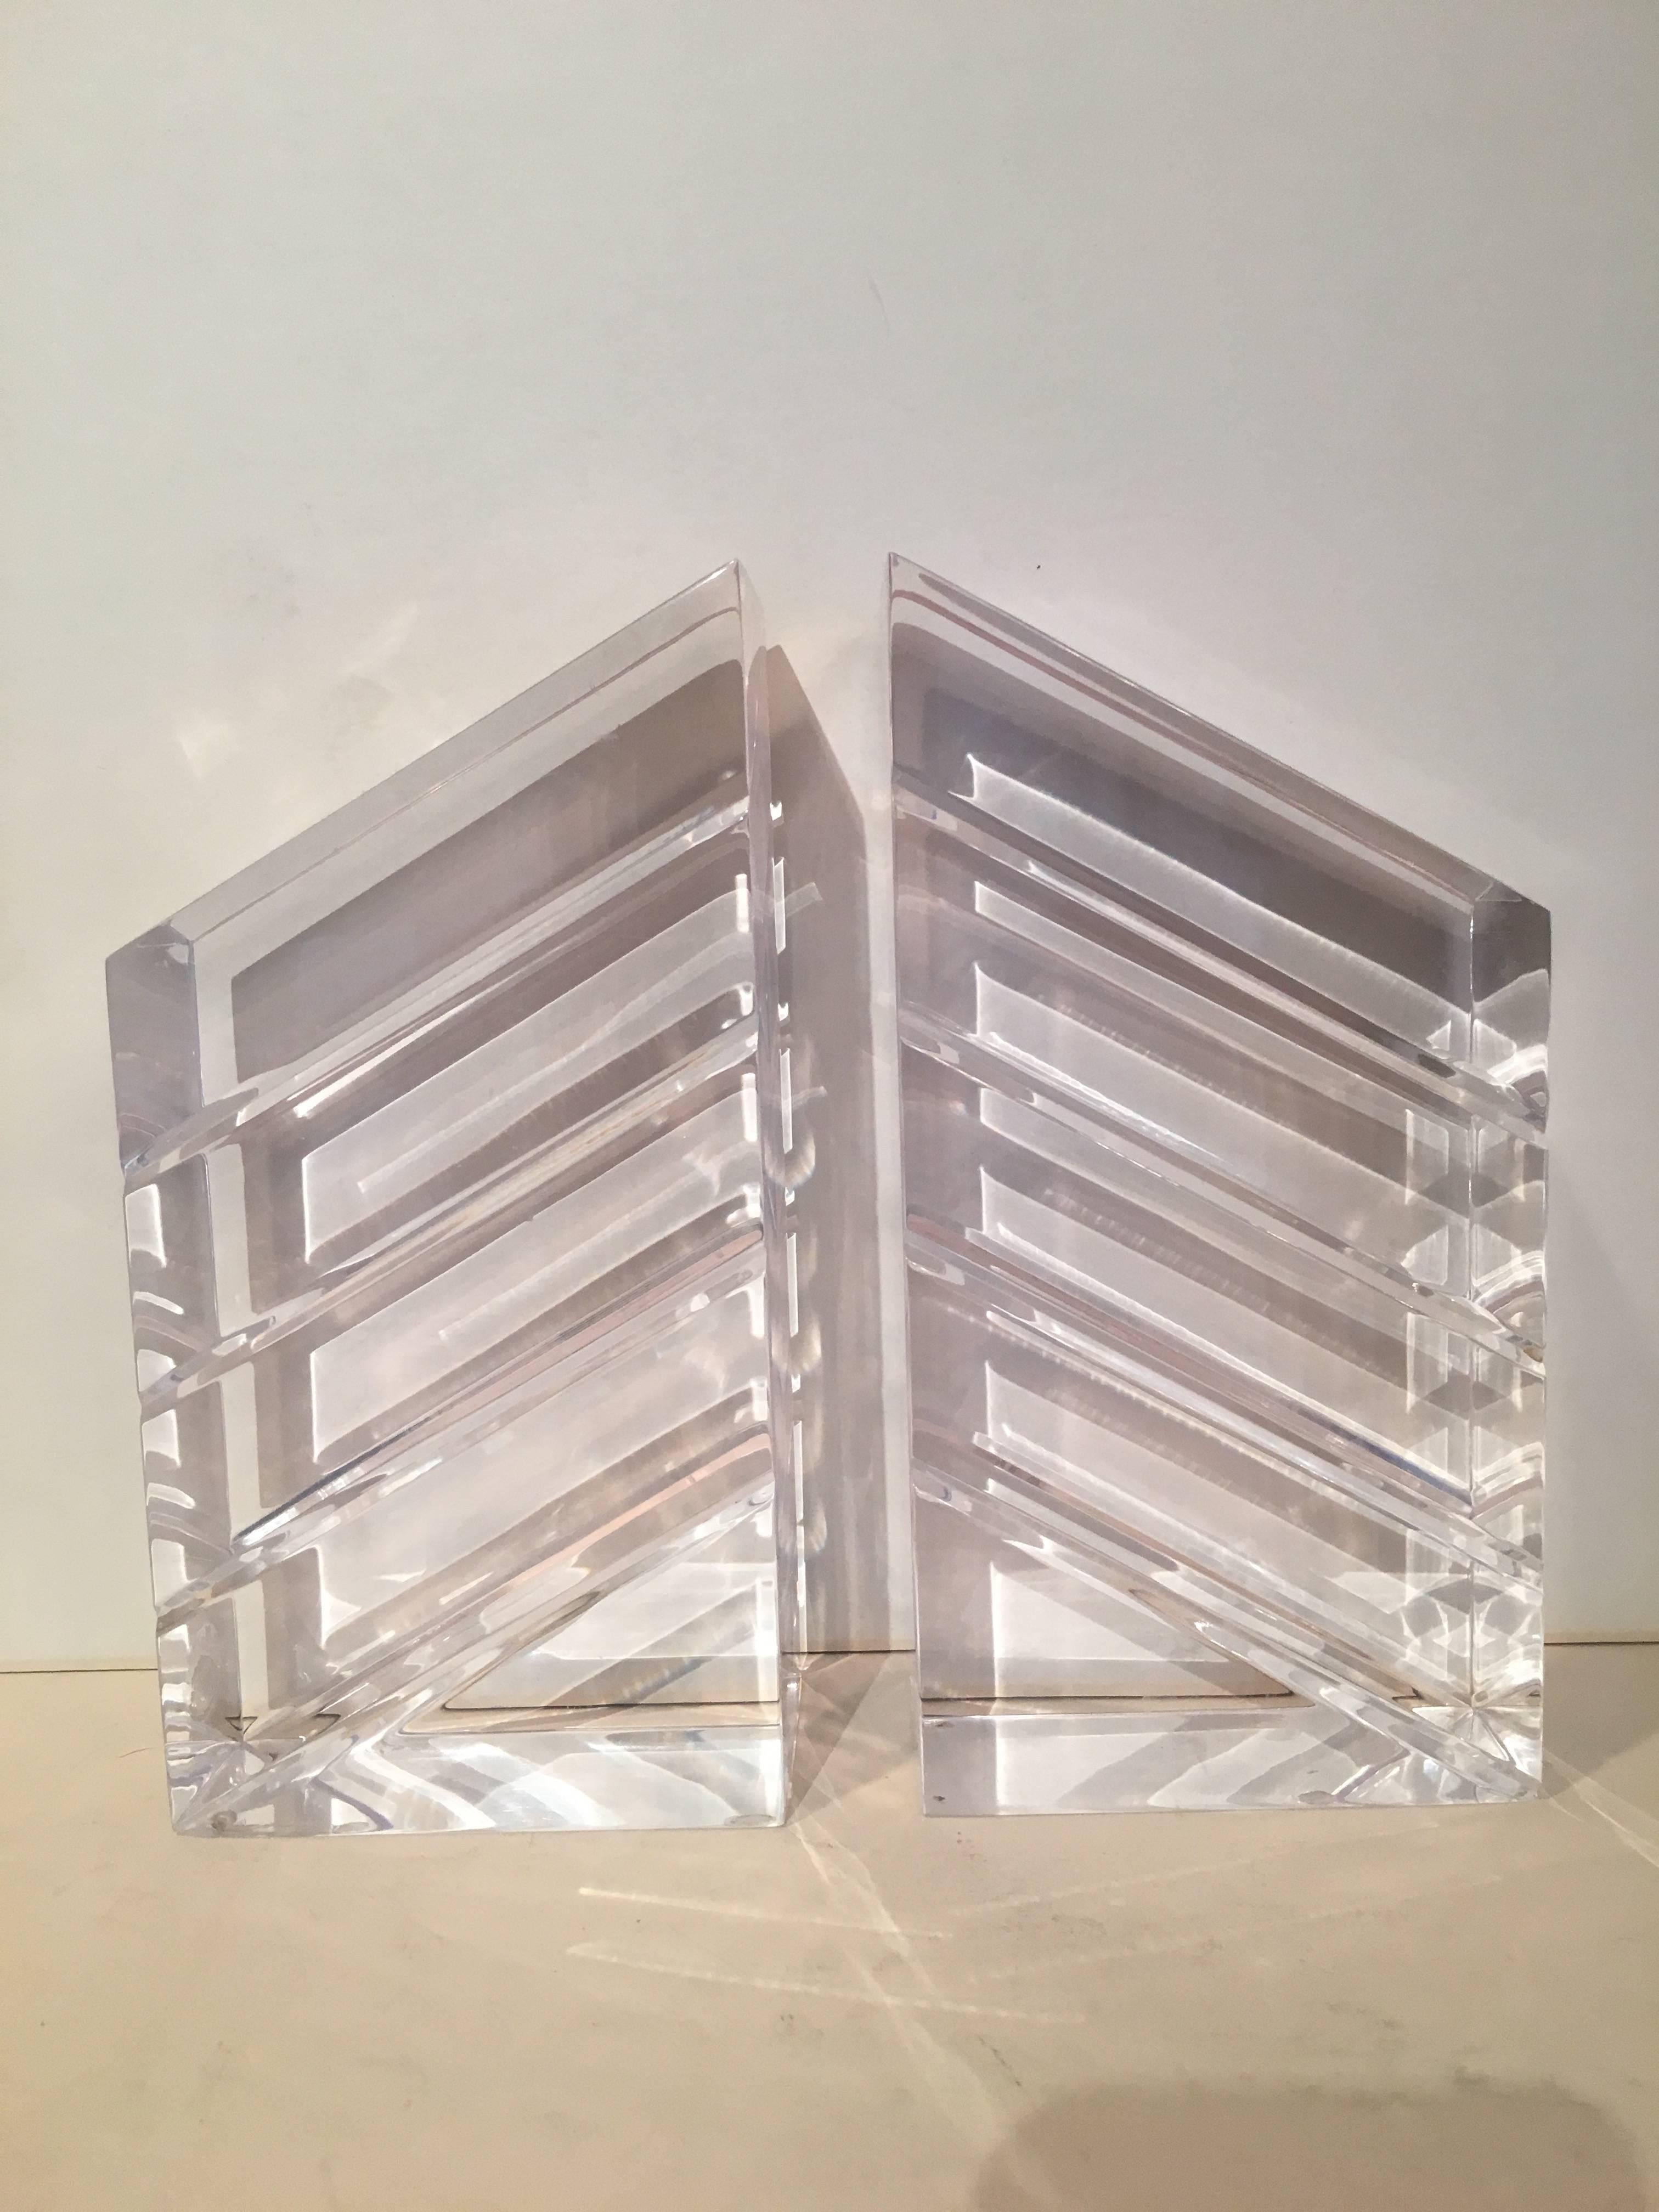 lucite book ends